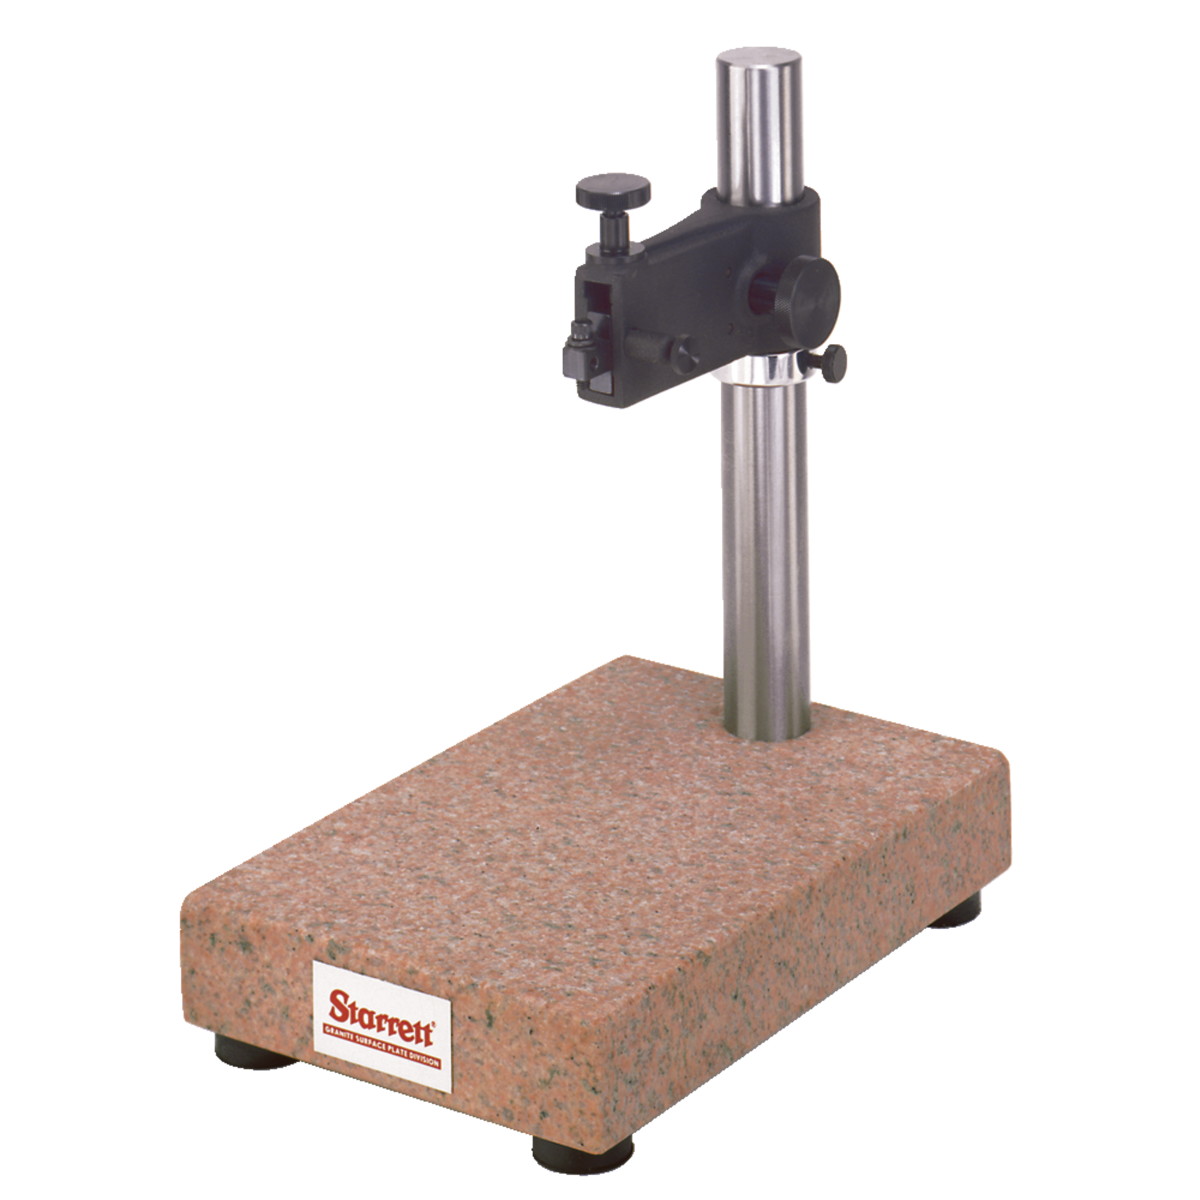 Light House Beauty 8 x 12 x 2 in. Granite Comparator Stand Without Indicator